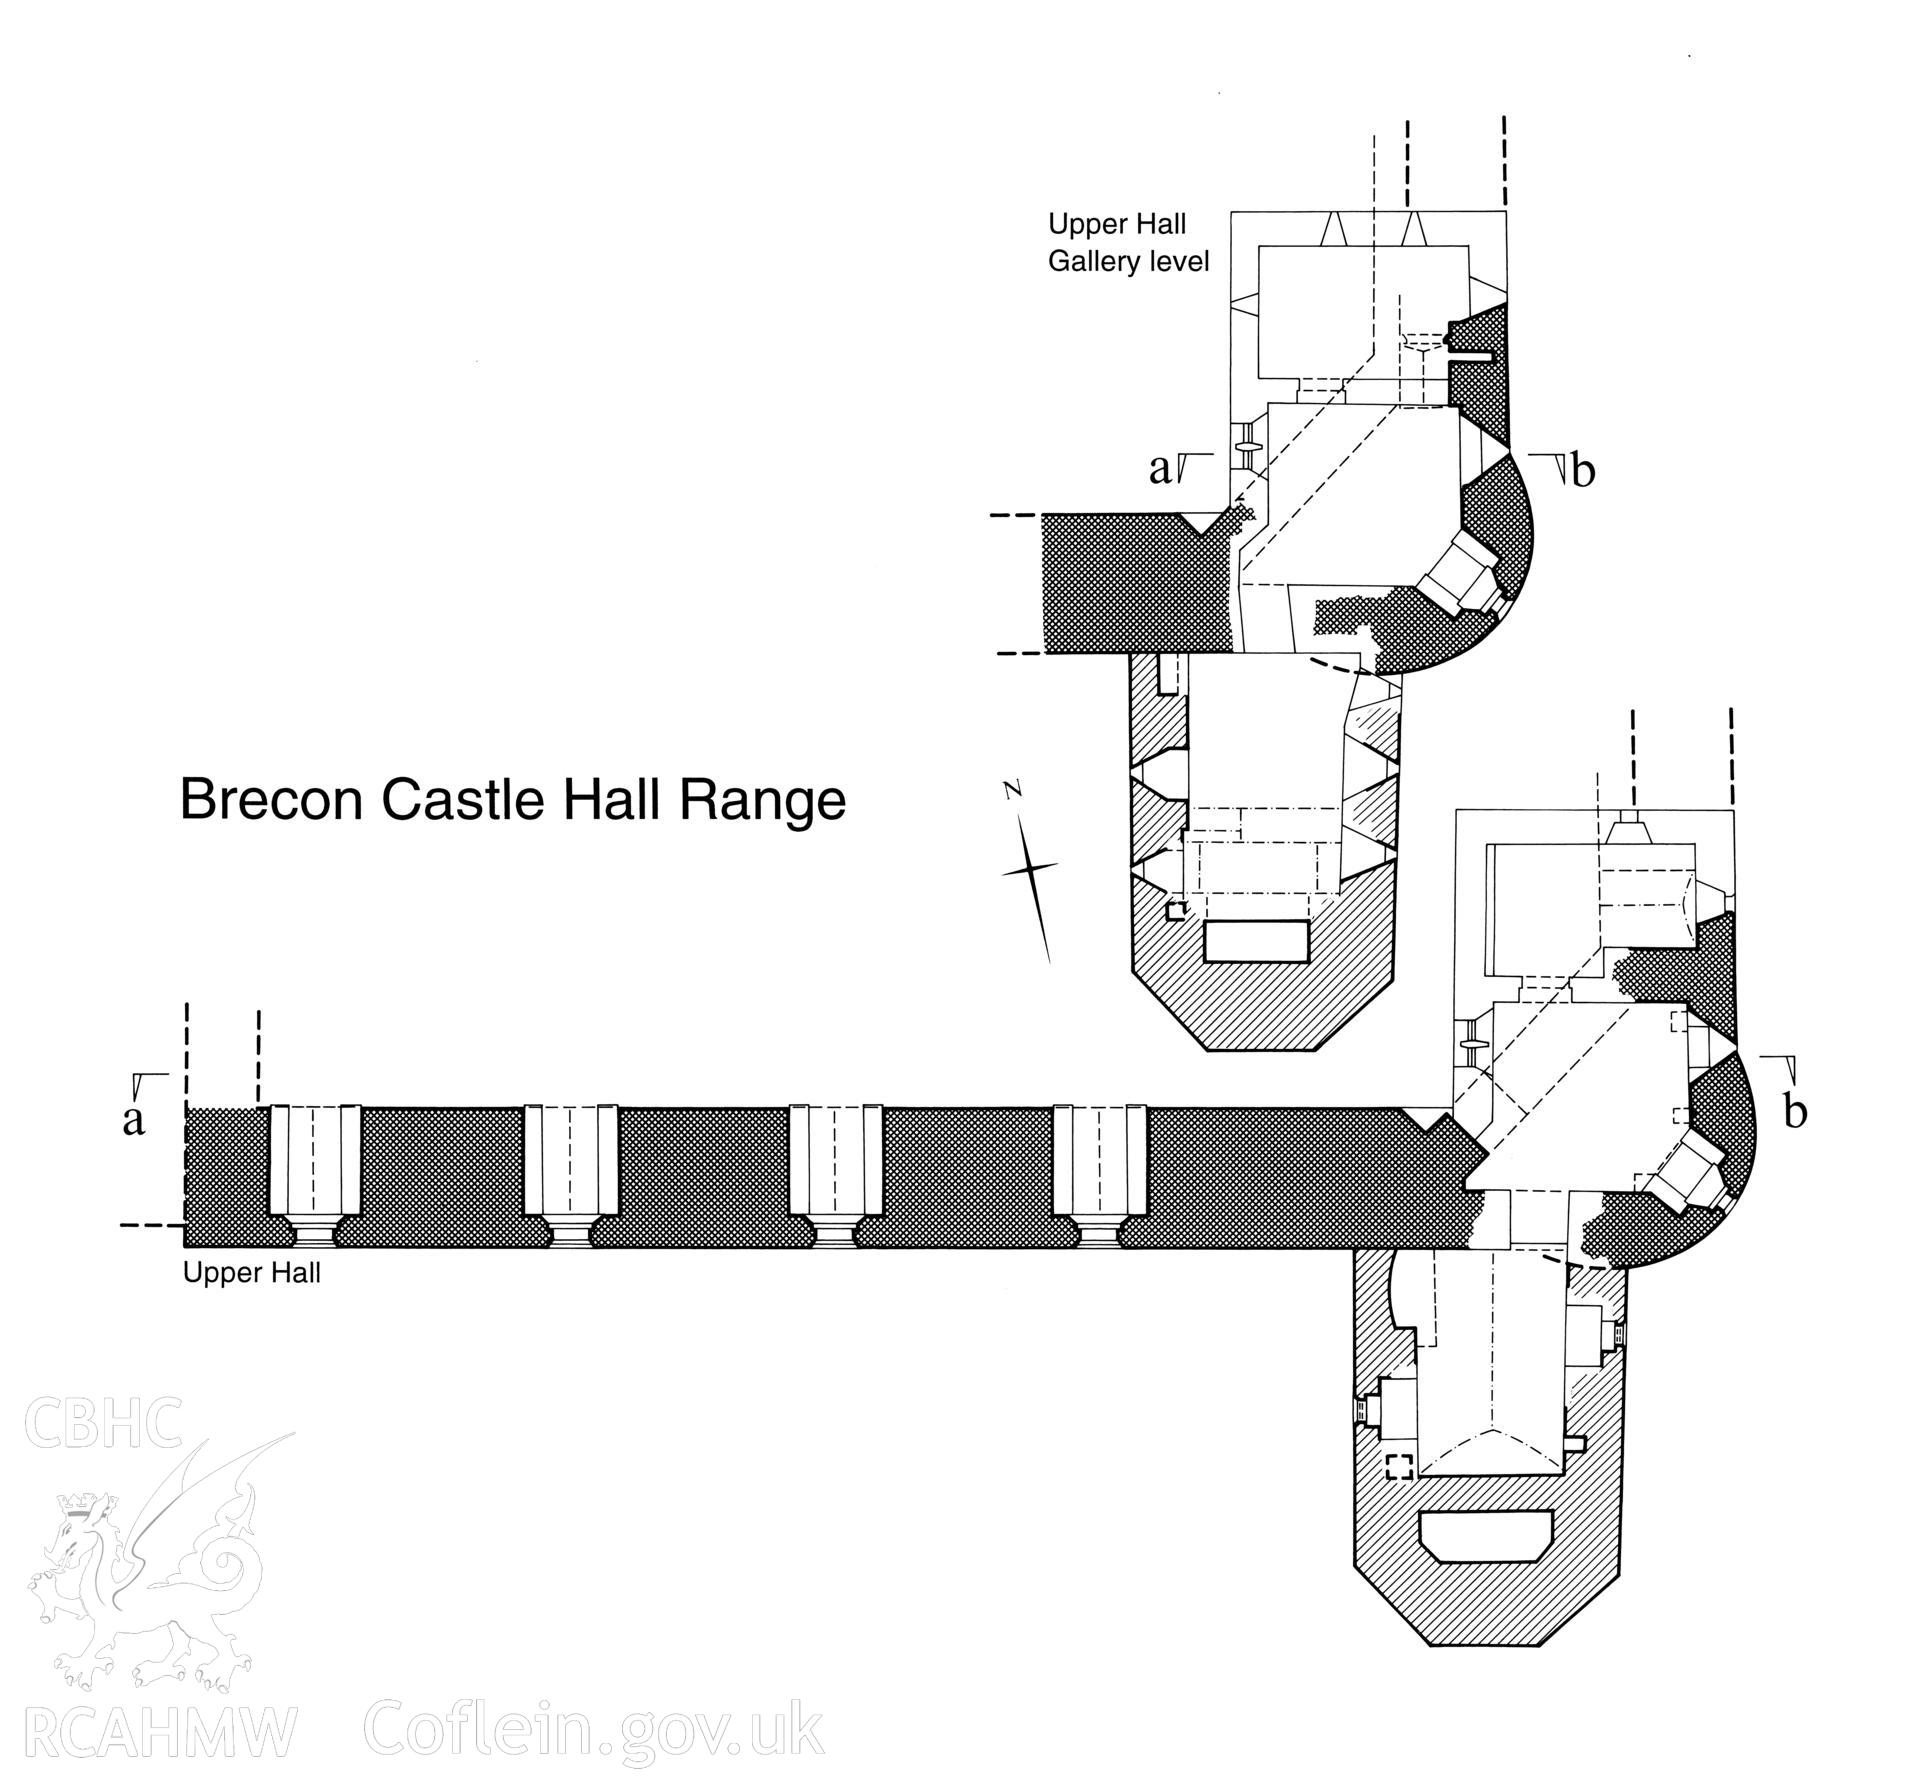 Brecon Castle; measured plan showing of hall range at Brecon Castle, produced by RCAHMW